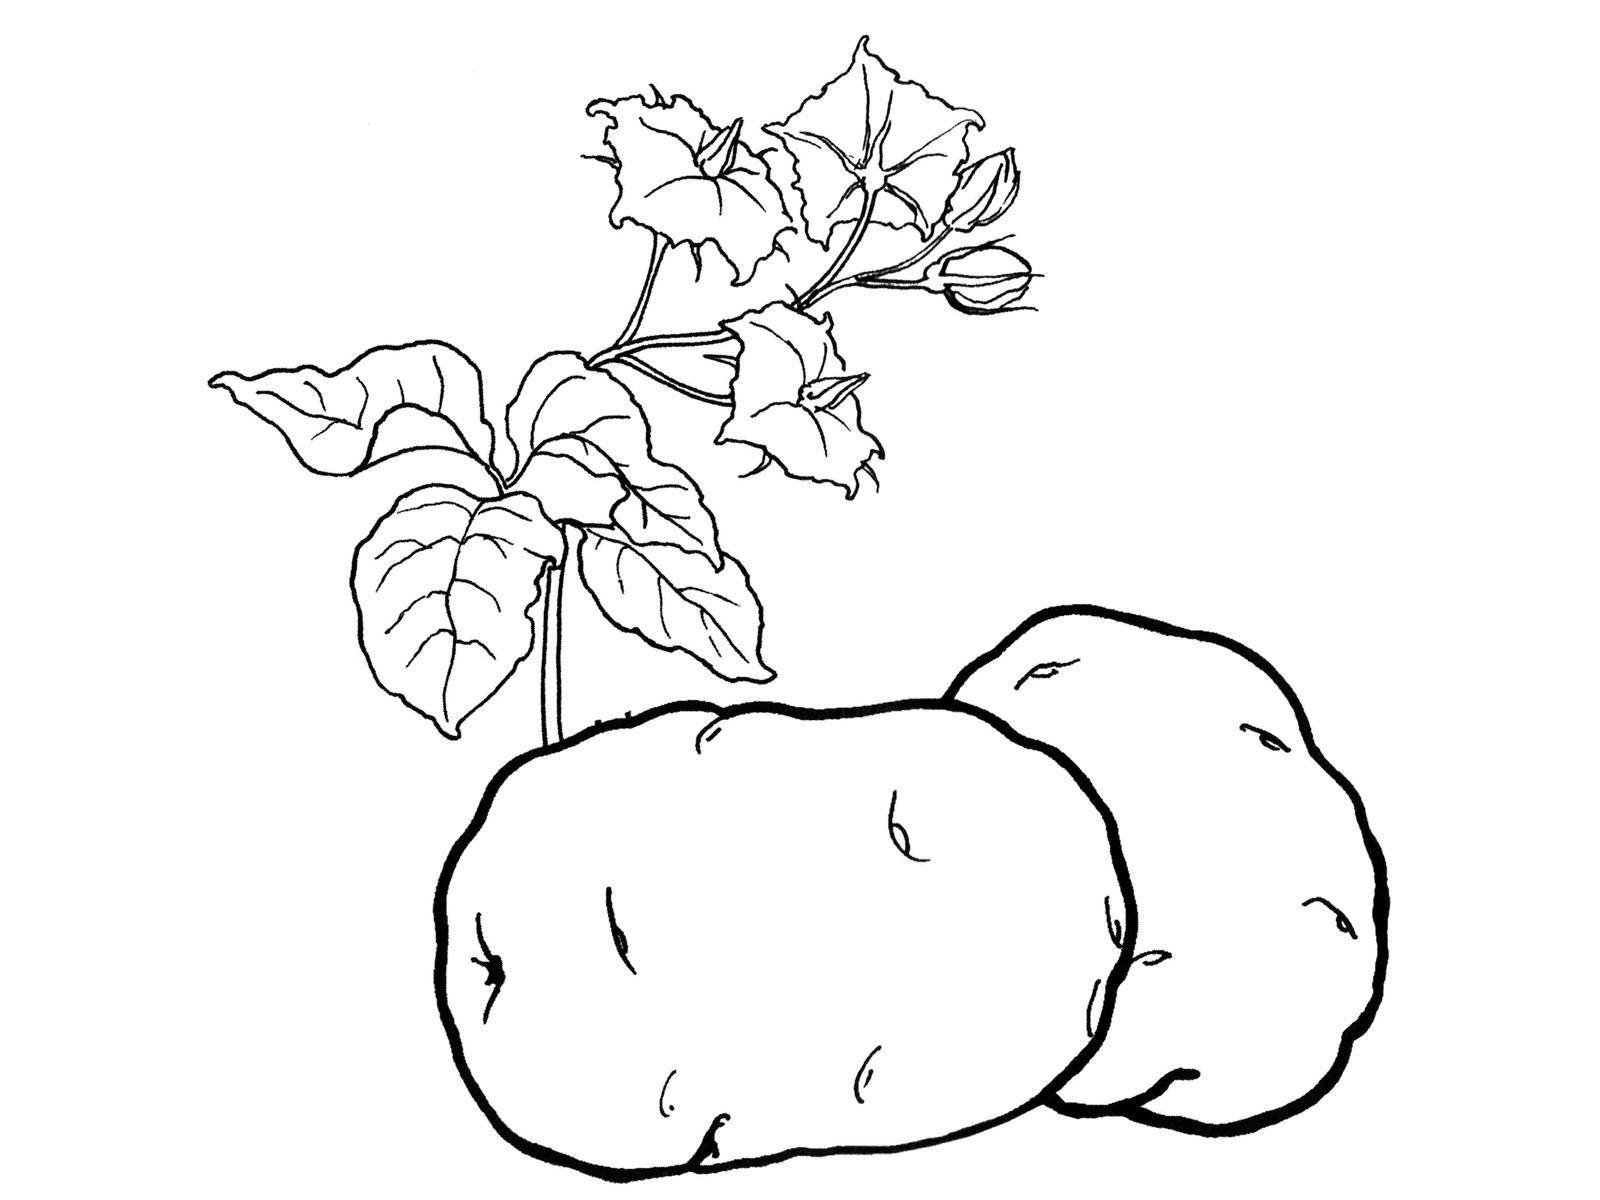 Coloring Potatoes. Category vegetables. Tags:  potatoes.